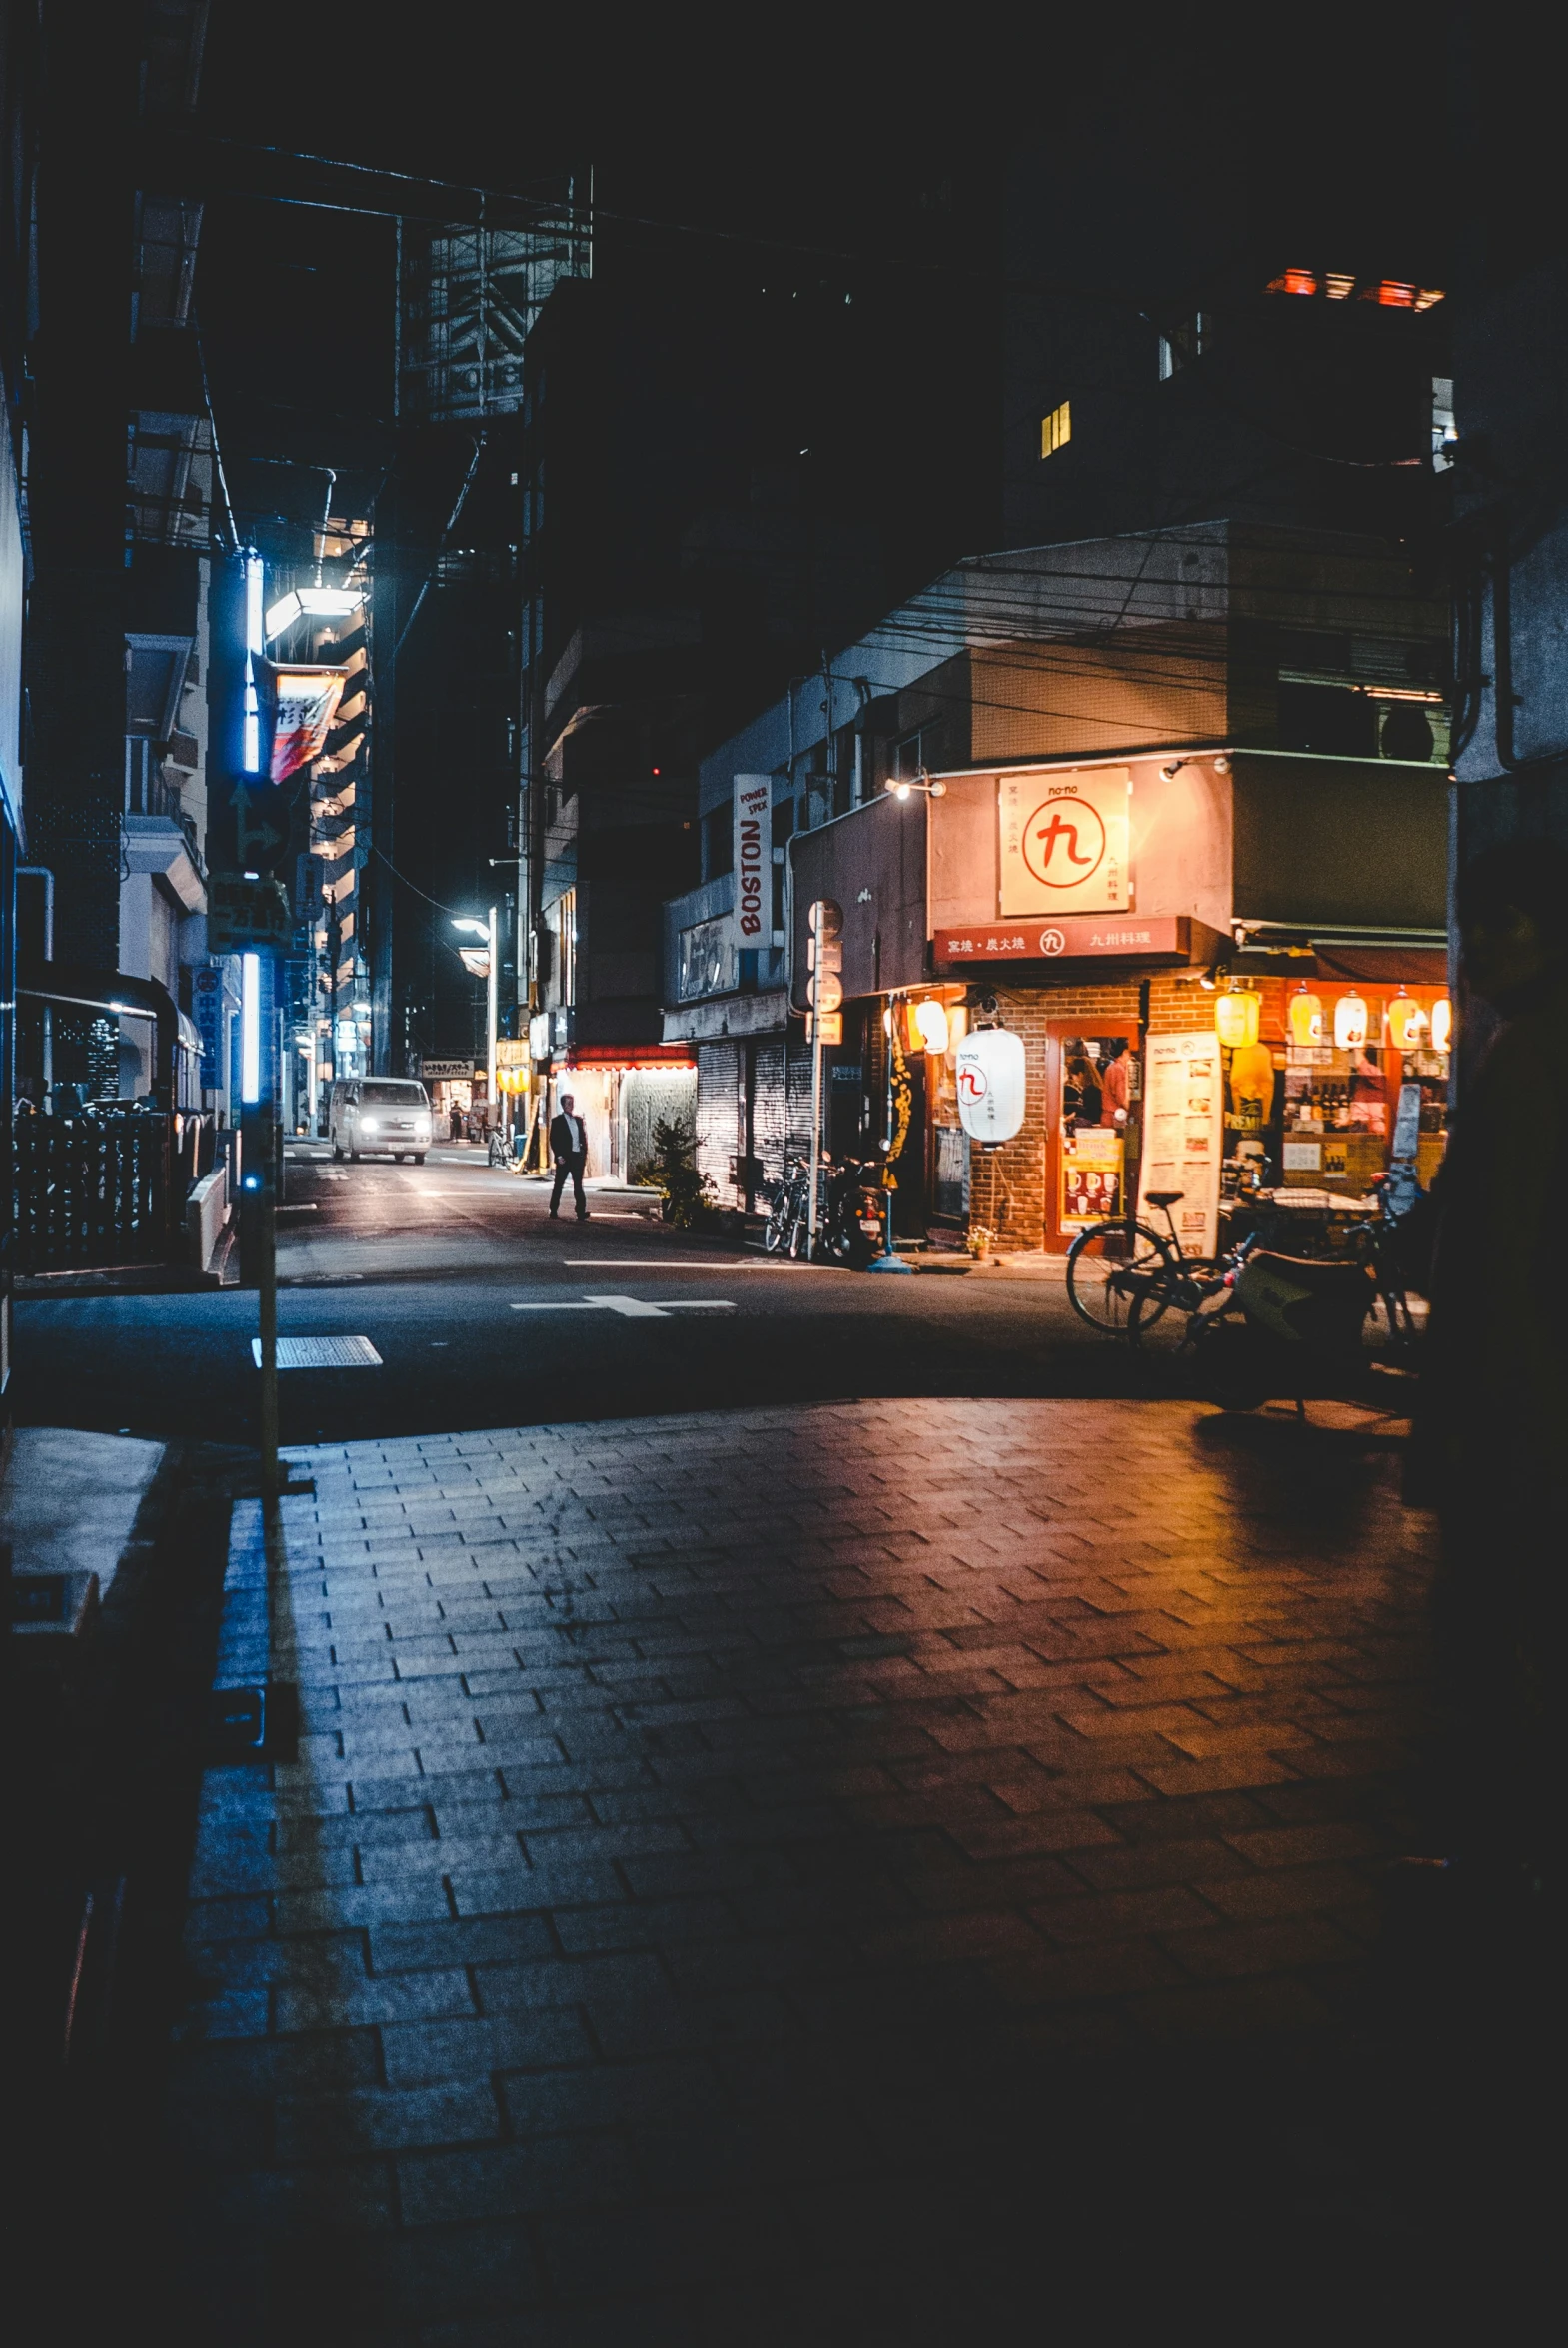 a small business on a quiet dark street